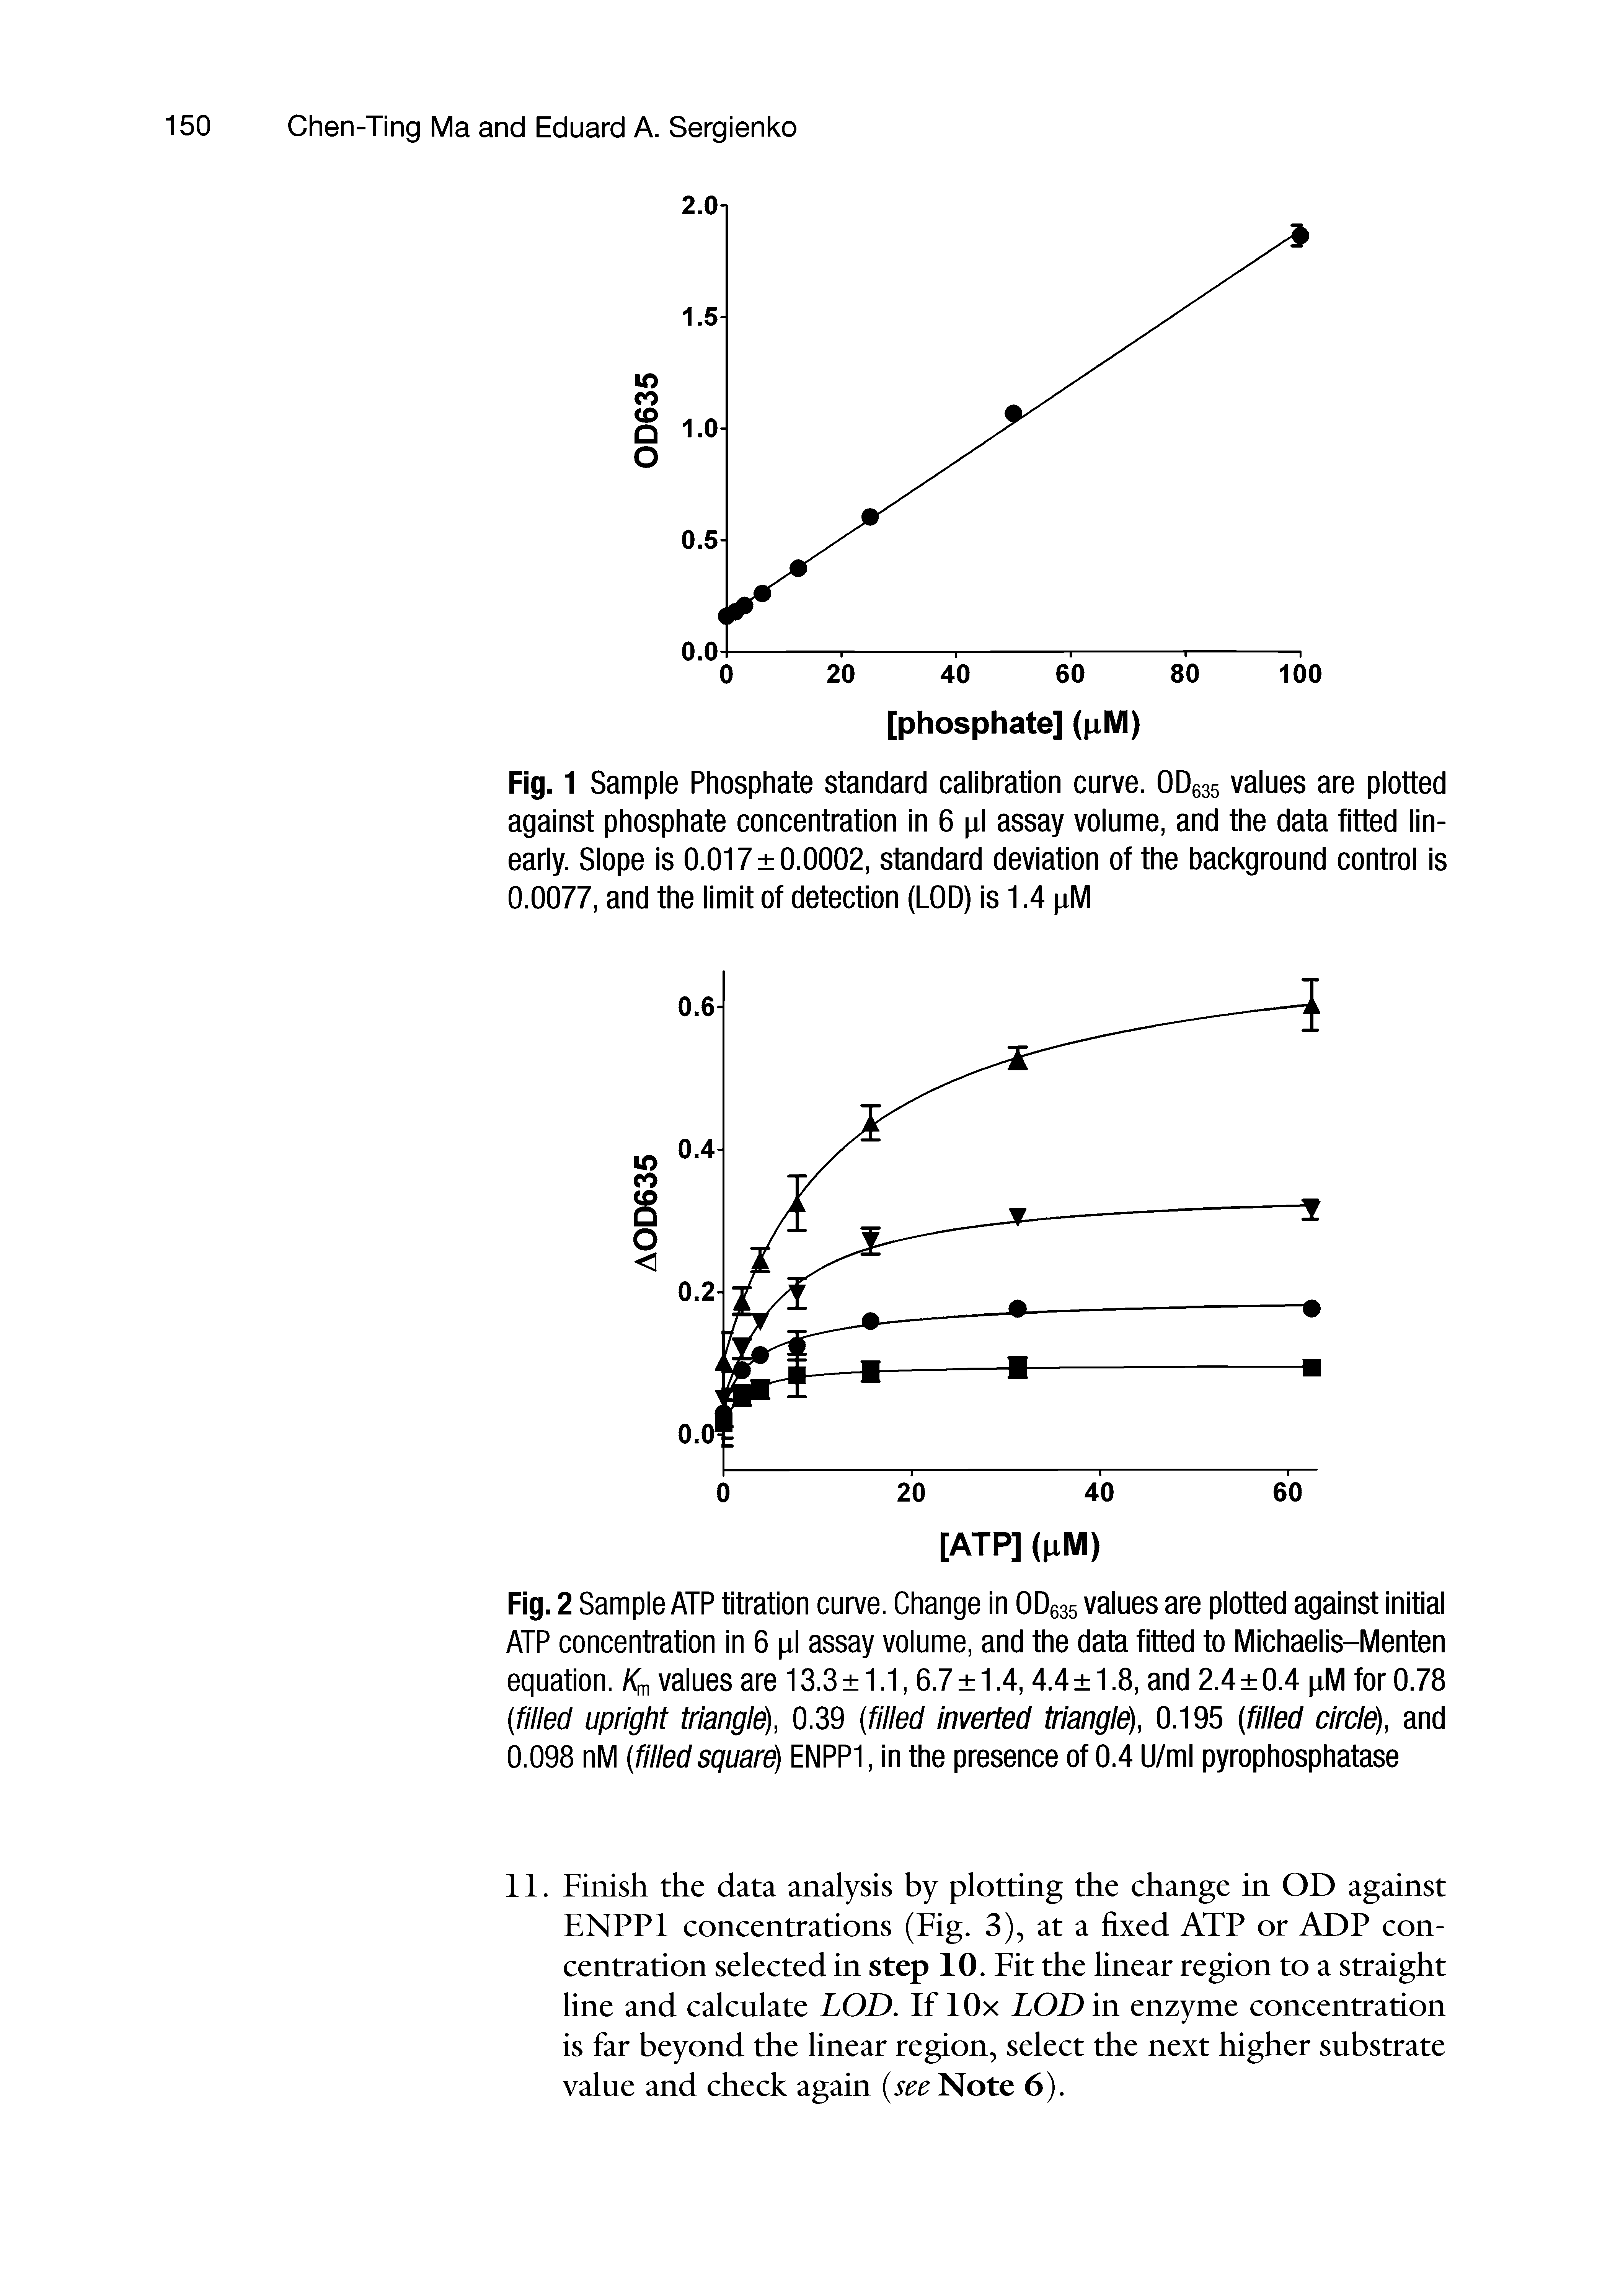 Fig. 2 Sample ATP titration curve. Change in ODess values are plotted against initial ATP concentration in 6 pi assay volume, and the data fitted to Michaelis-Menten equation. /C, values are 13.3 1.1,6.7 1.4,4.4 1.8, and 2.4 0.4 pM for 0.78 (filled upright triangid), 0.39 (filled inverted triangld, 0.195 (filled circid), and 0.098 nM (filled squard) ENPP1, in the presence of 0.4 U/ml pyrophosphatase...